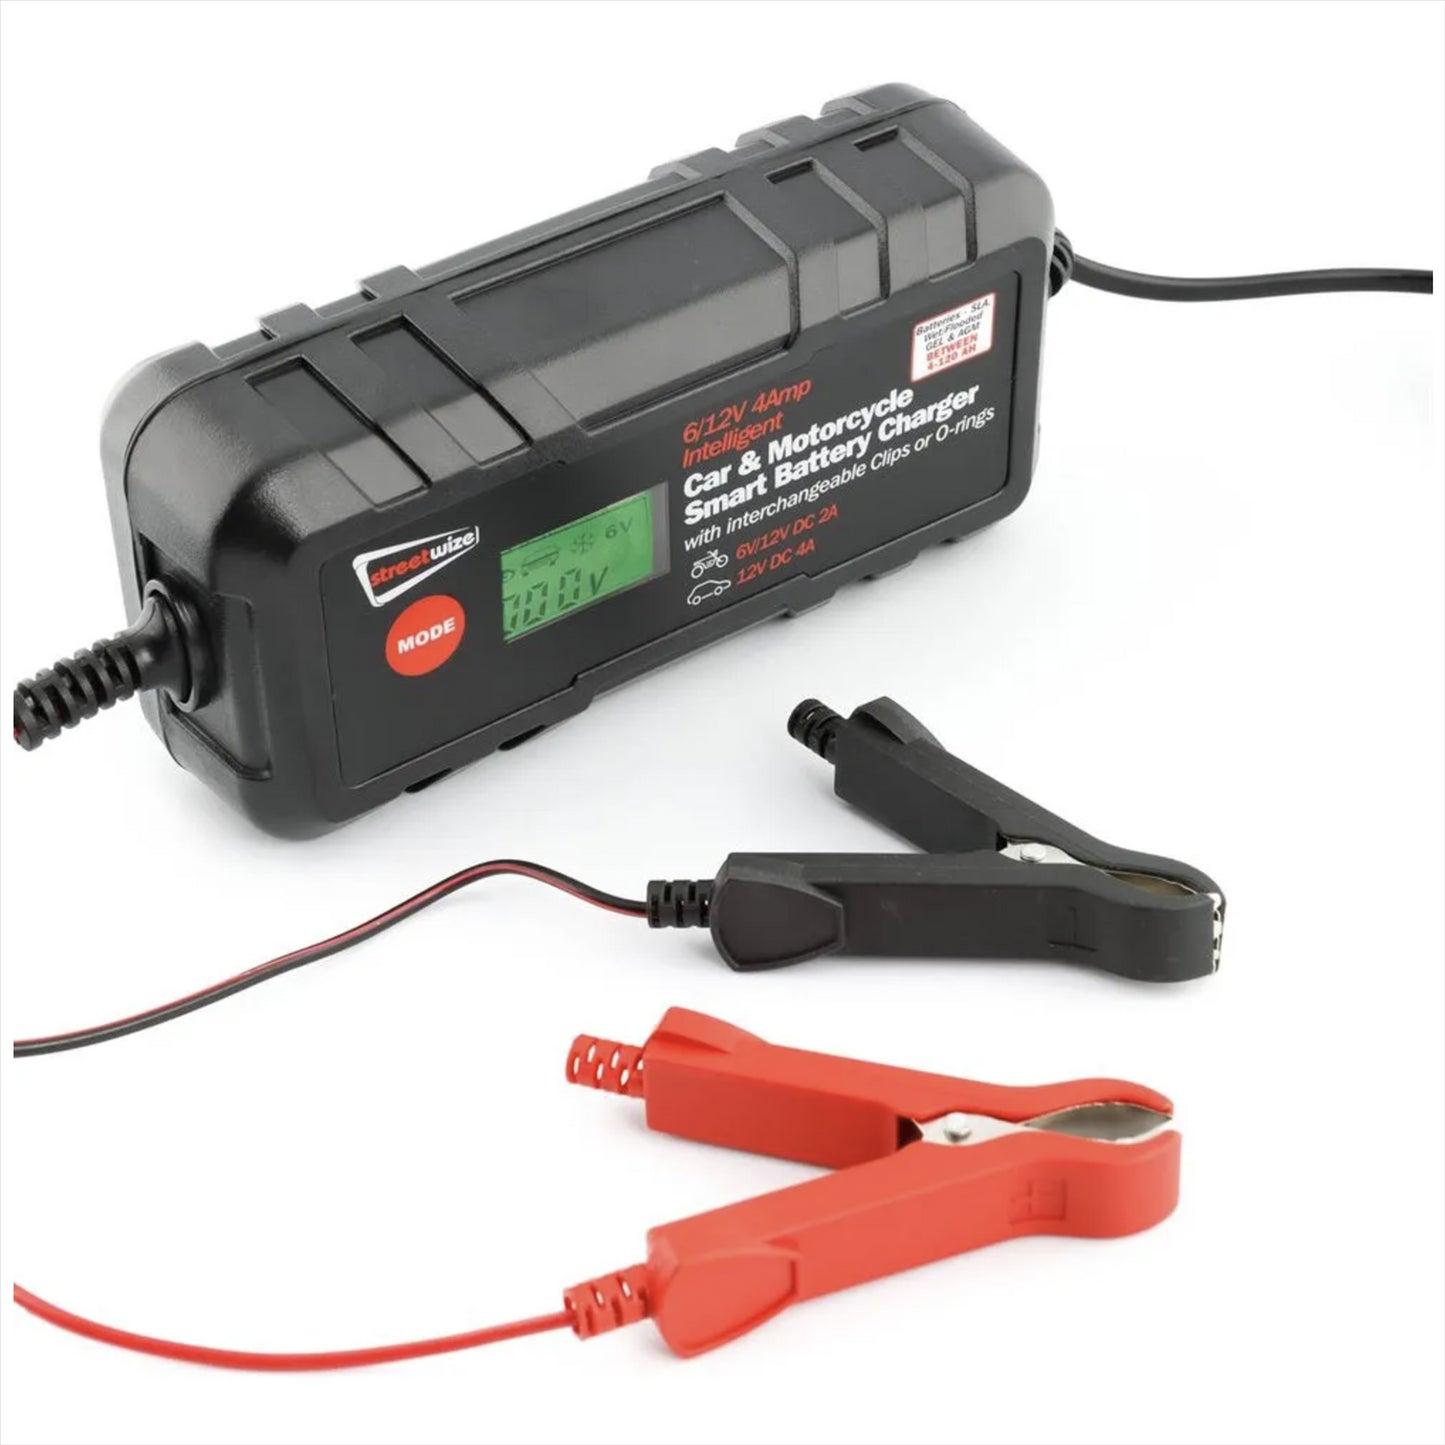 Streetwize 6/12v Smart Battery Charger